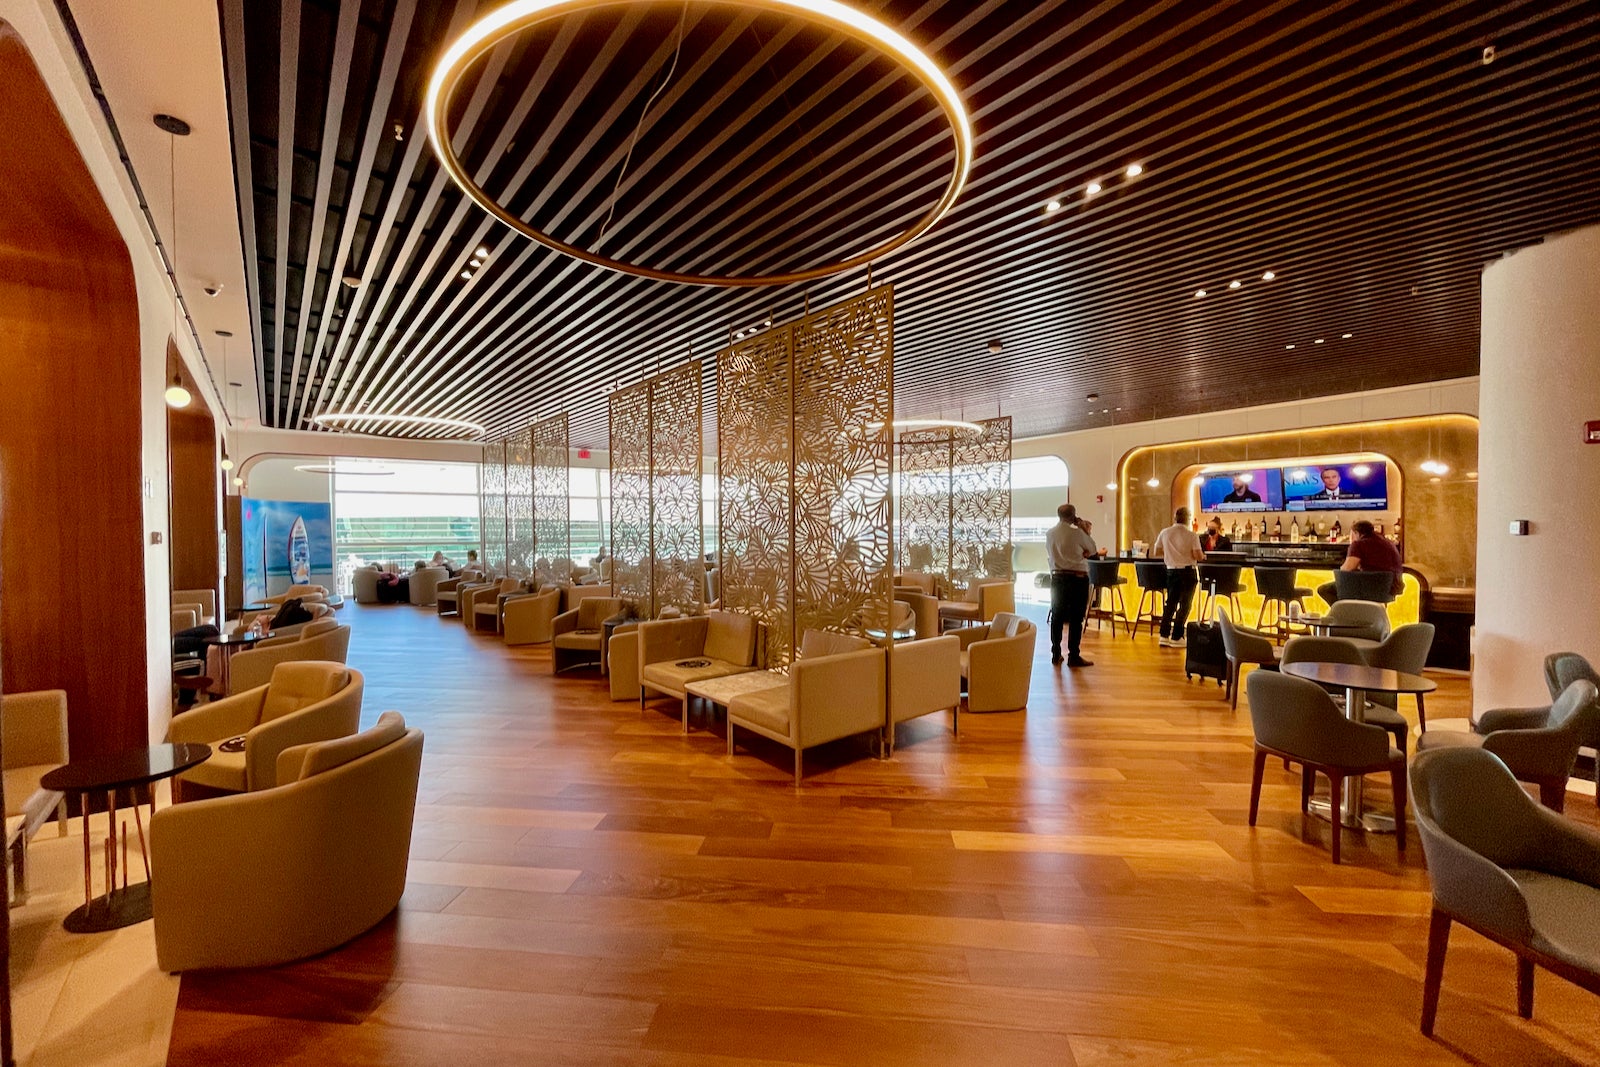 a large, open airport lounge with ample seating and lots of natural light from large windows